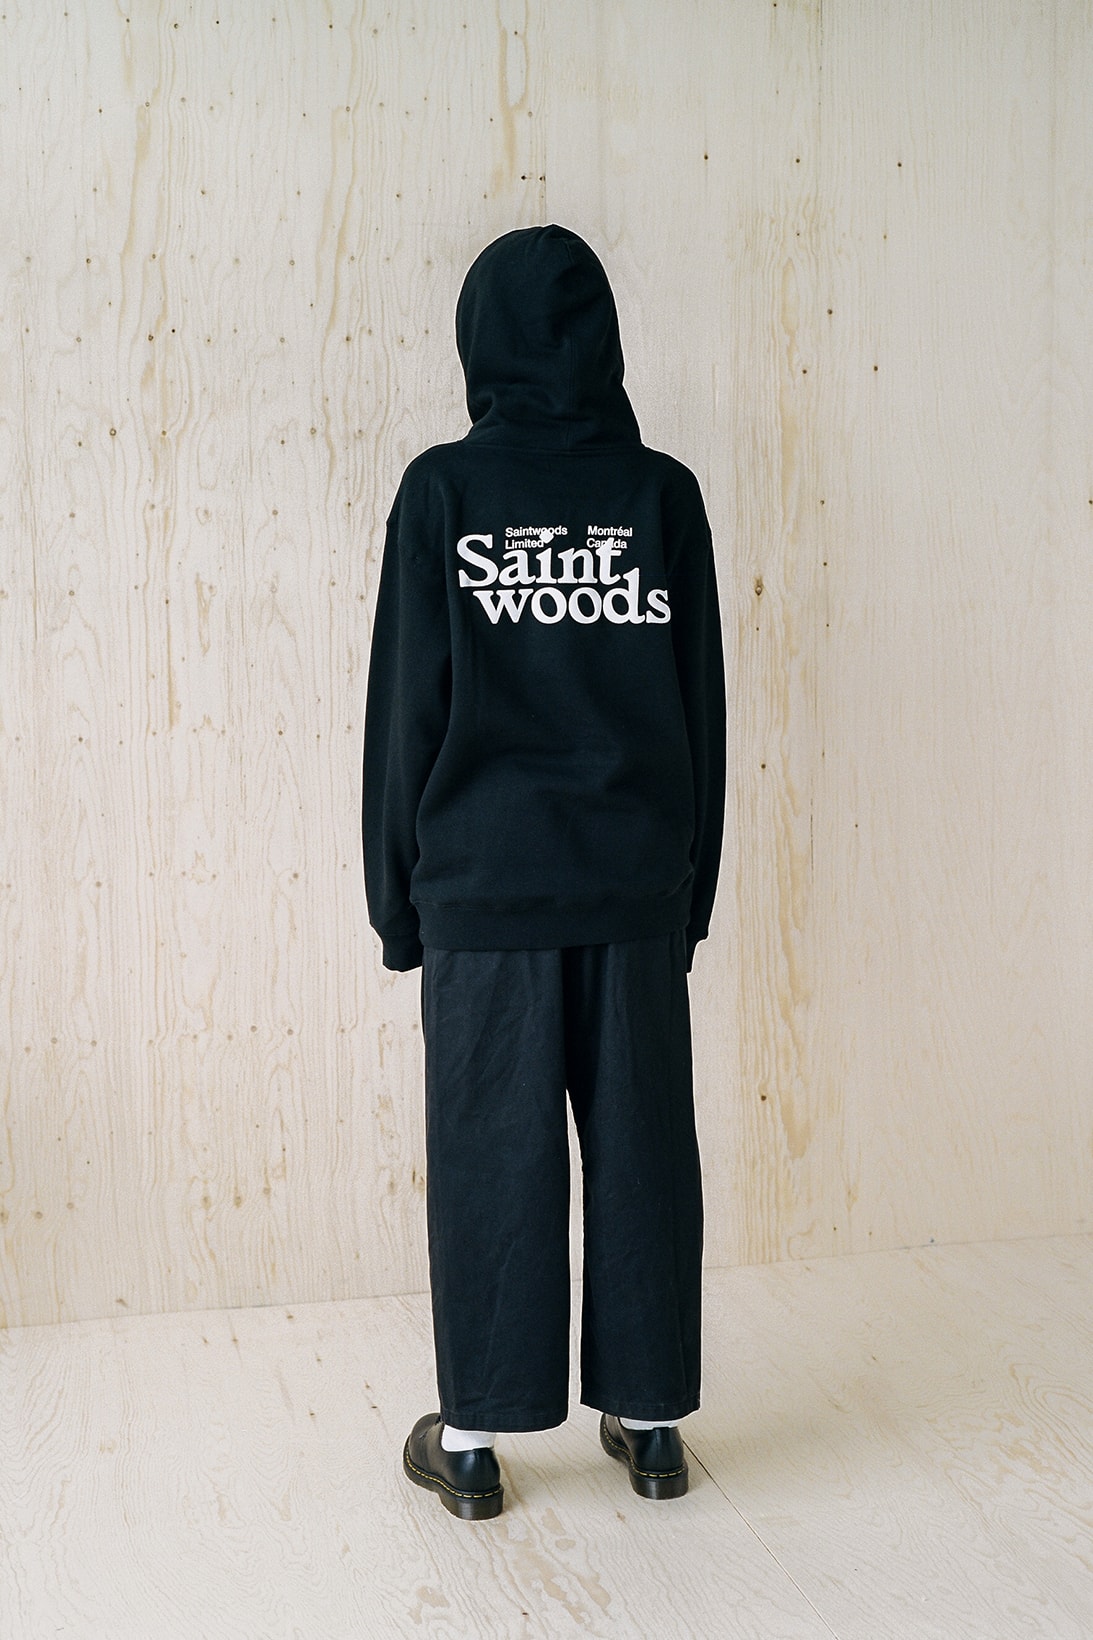 saintwoods ready to wear rtw helmut lang collaboration home lifestyle montreal